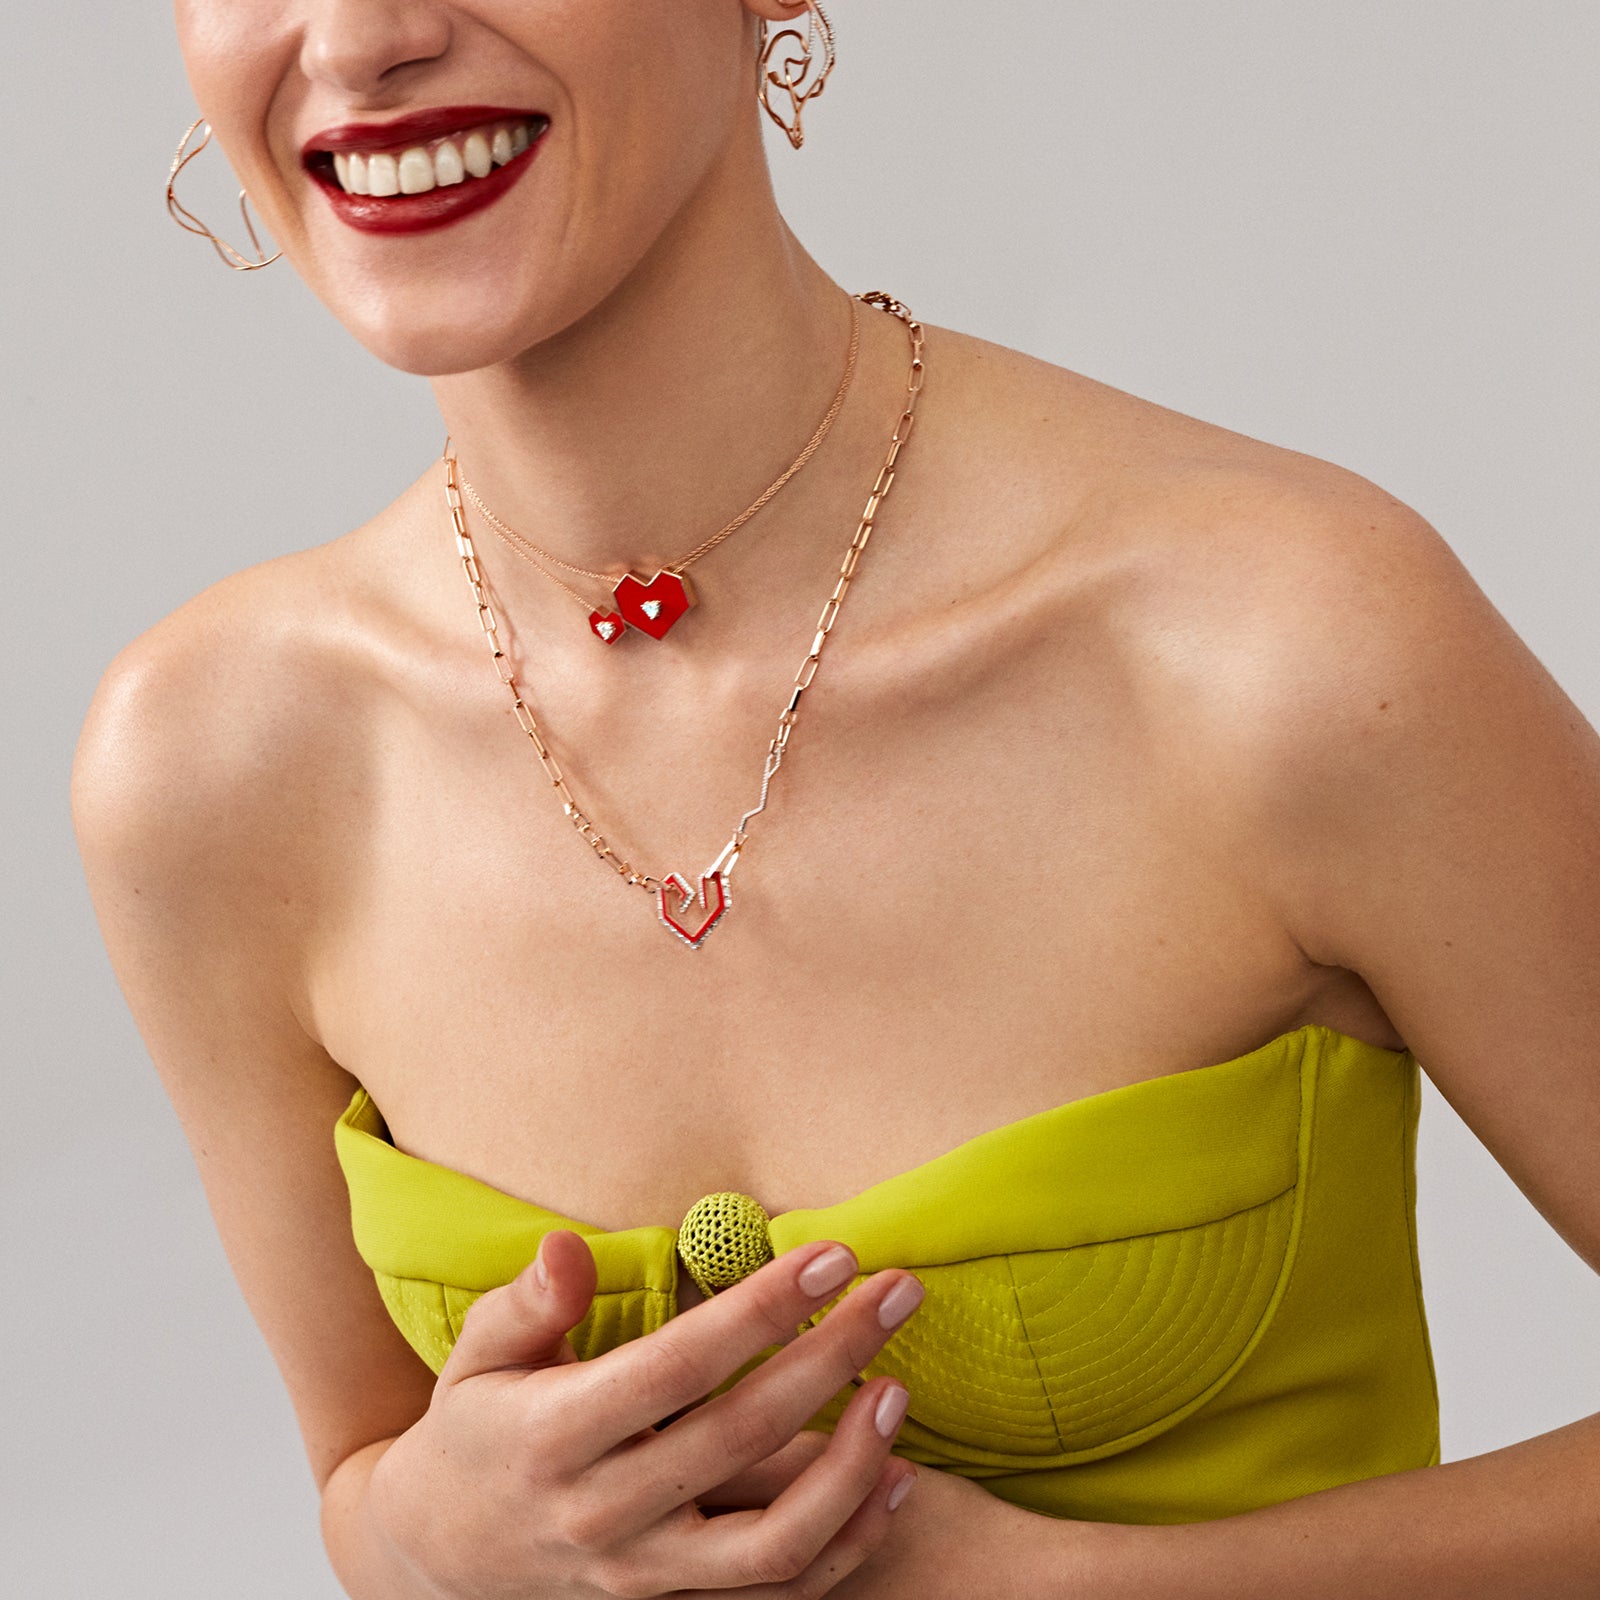 Afecto Necklace Roslow Gold / White Brilliant Diamond and Red Ceramic